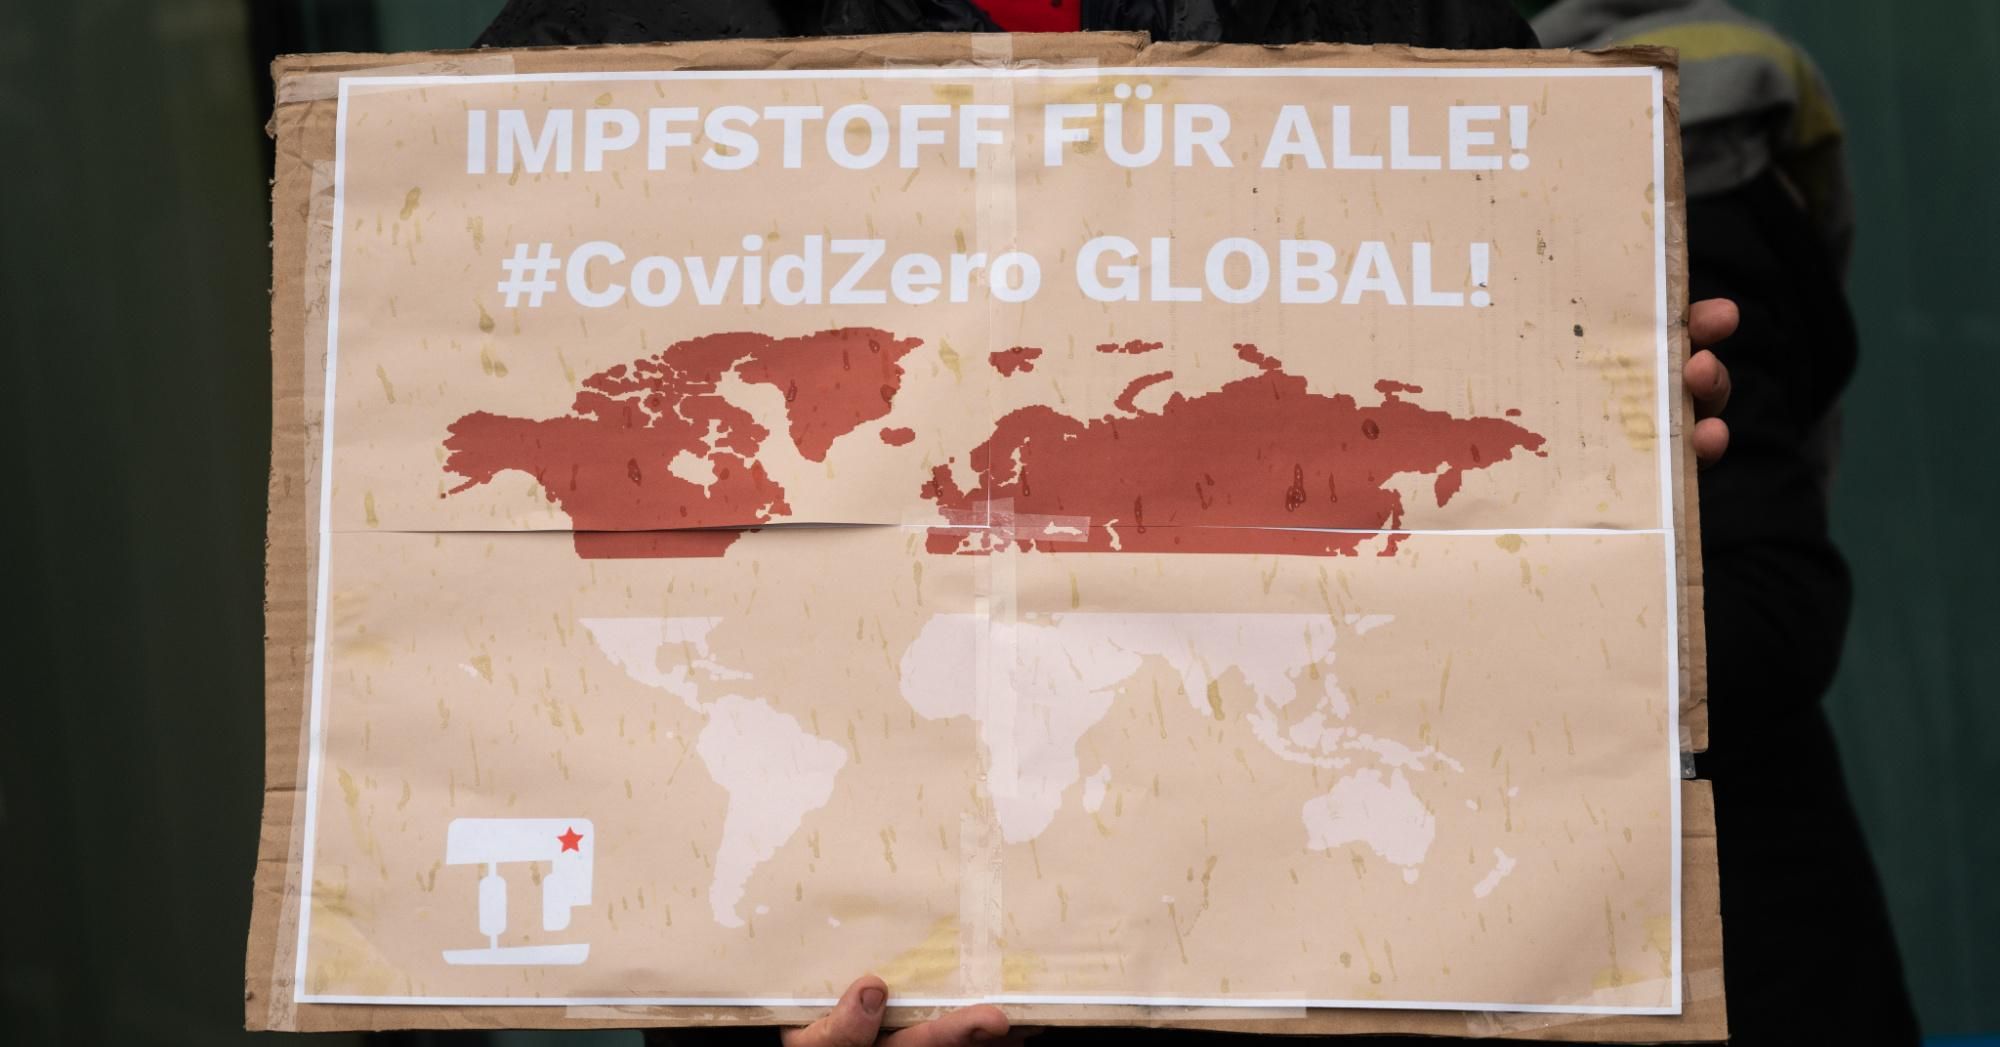 A demonstrator carries a banner that reads "Vaccine For All! #CovidZero Global!" during a protest in front of Pfizer headquarters in Berlin, Germany on January 23, 2021.